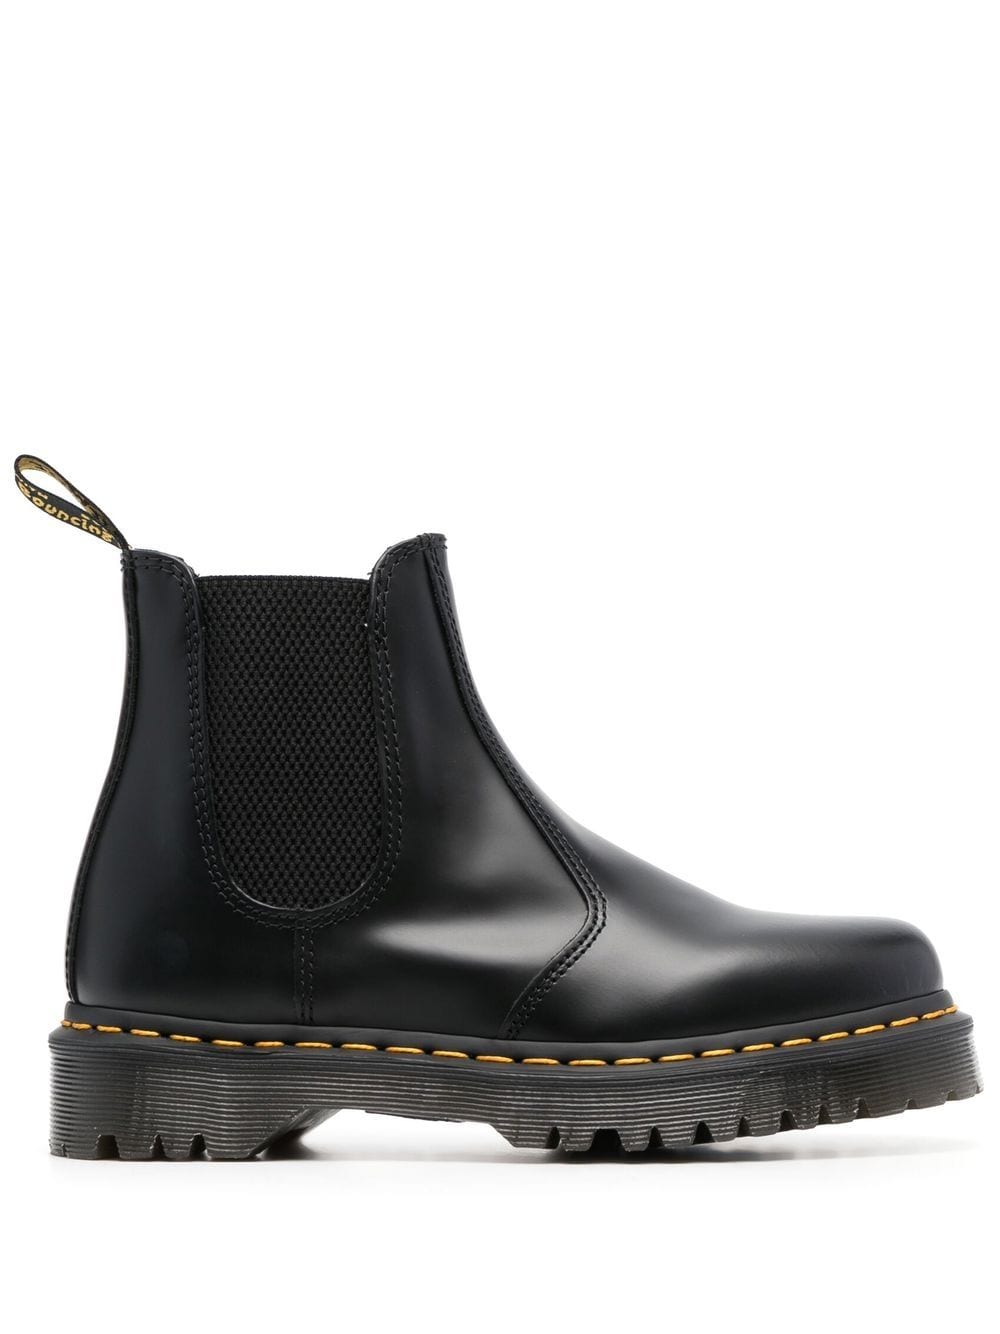 Dr. Martens leather round-toe boots - Black